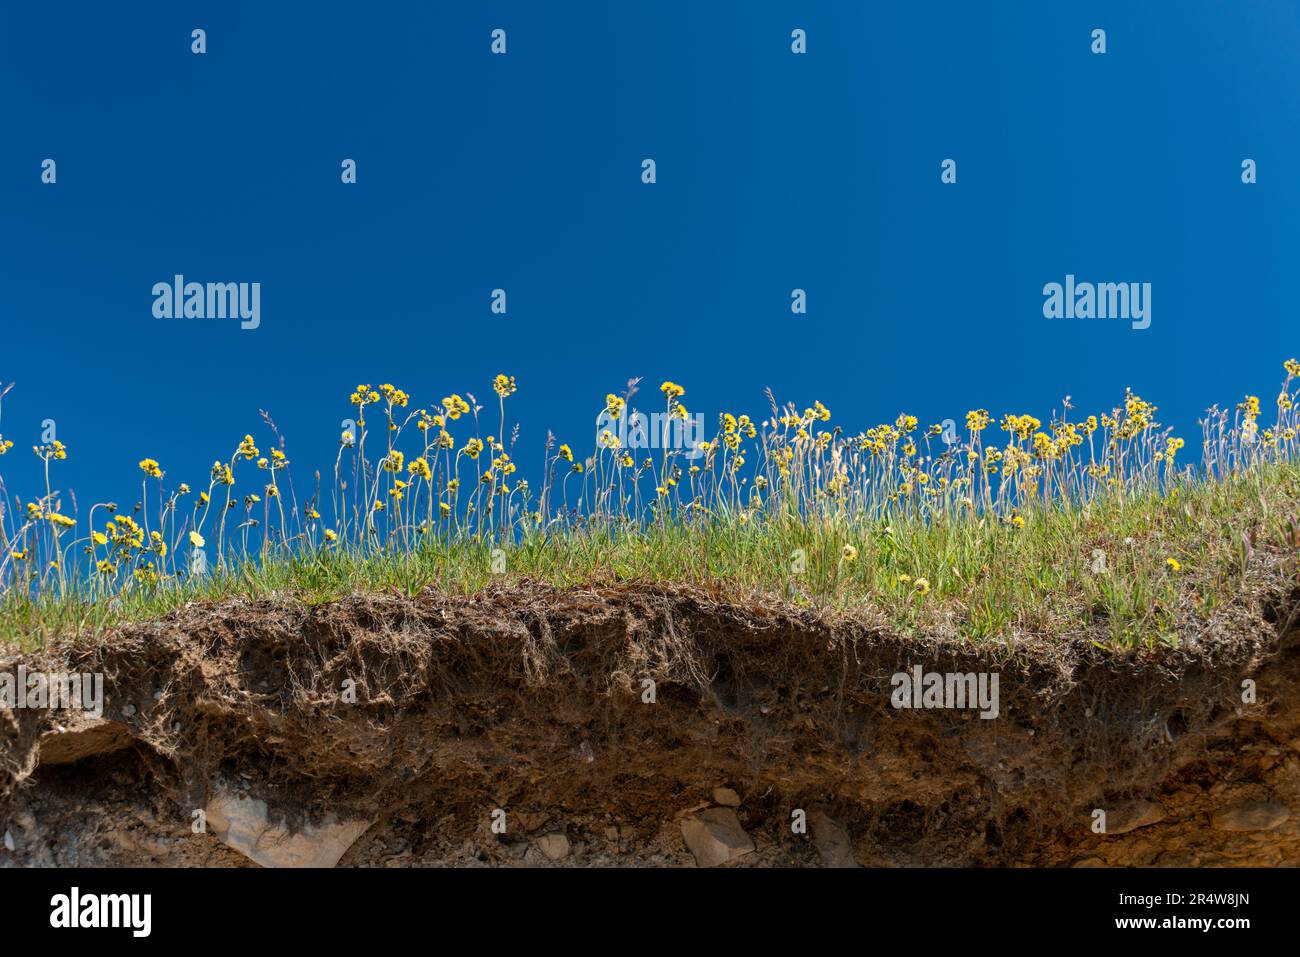 The edge of a cliff with a top layer of yellow dandelion flowers, grass and rich red soil. The ground has eroded and is undermined below the sod. Stock Photo